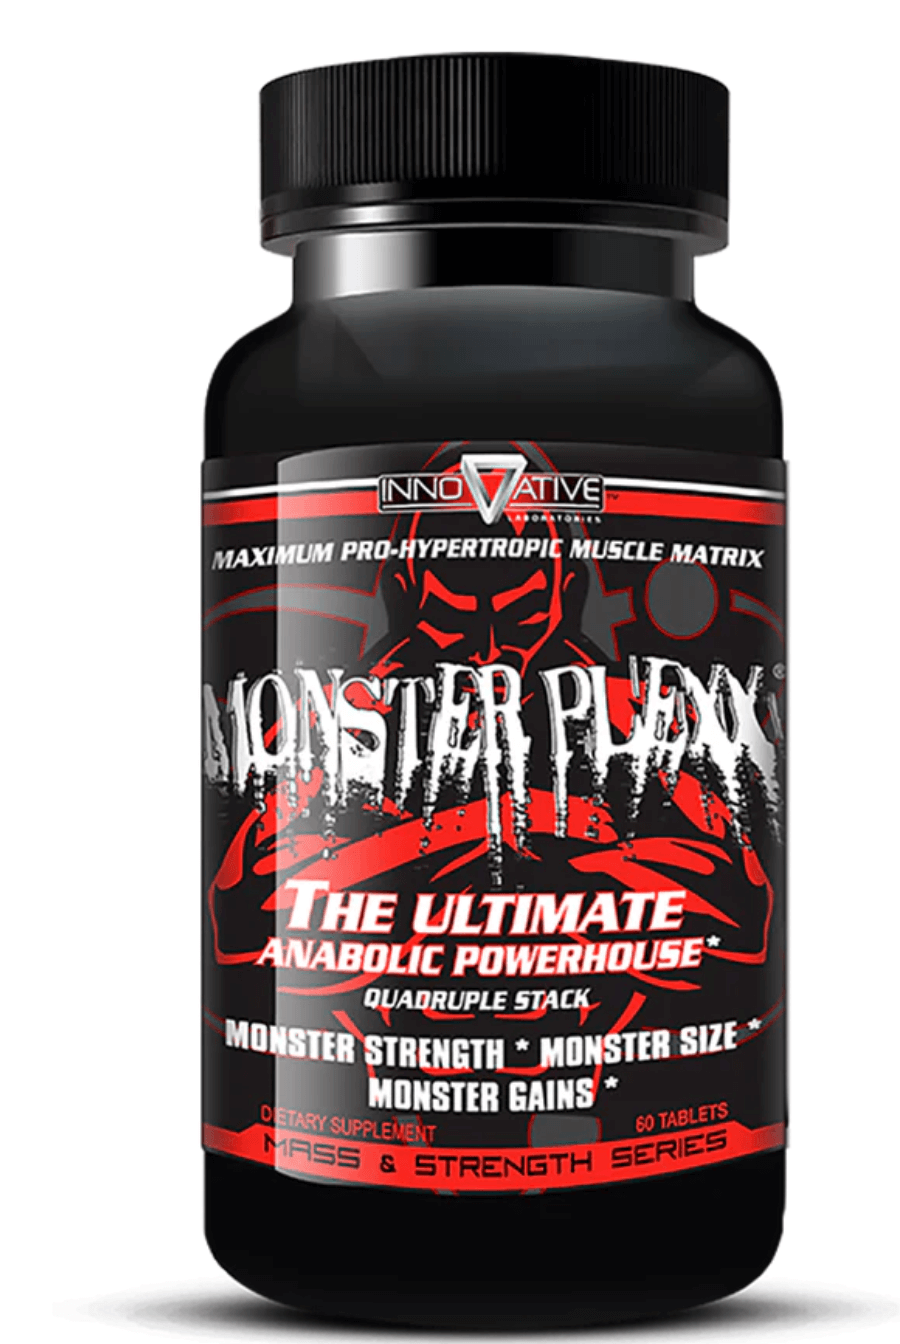 Hi-Tech Monster Plexx Monster Plexx® by Innovative Labs is one of the few legal pro hormone complexes that can actually give you intense gains in strength and size that you are looking for. Monster Plexx consists of 5 Pro-hormones combined at high level m